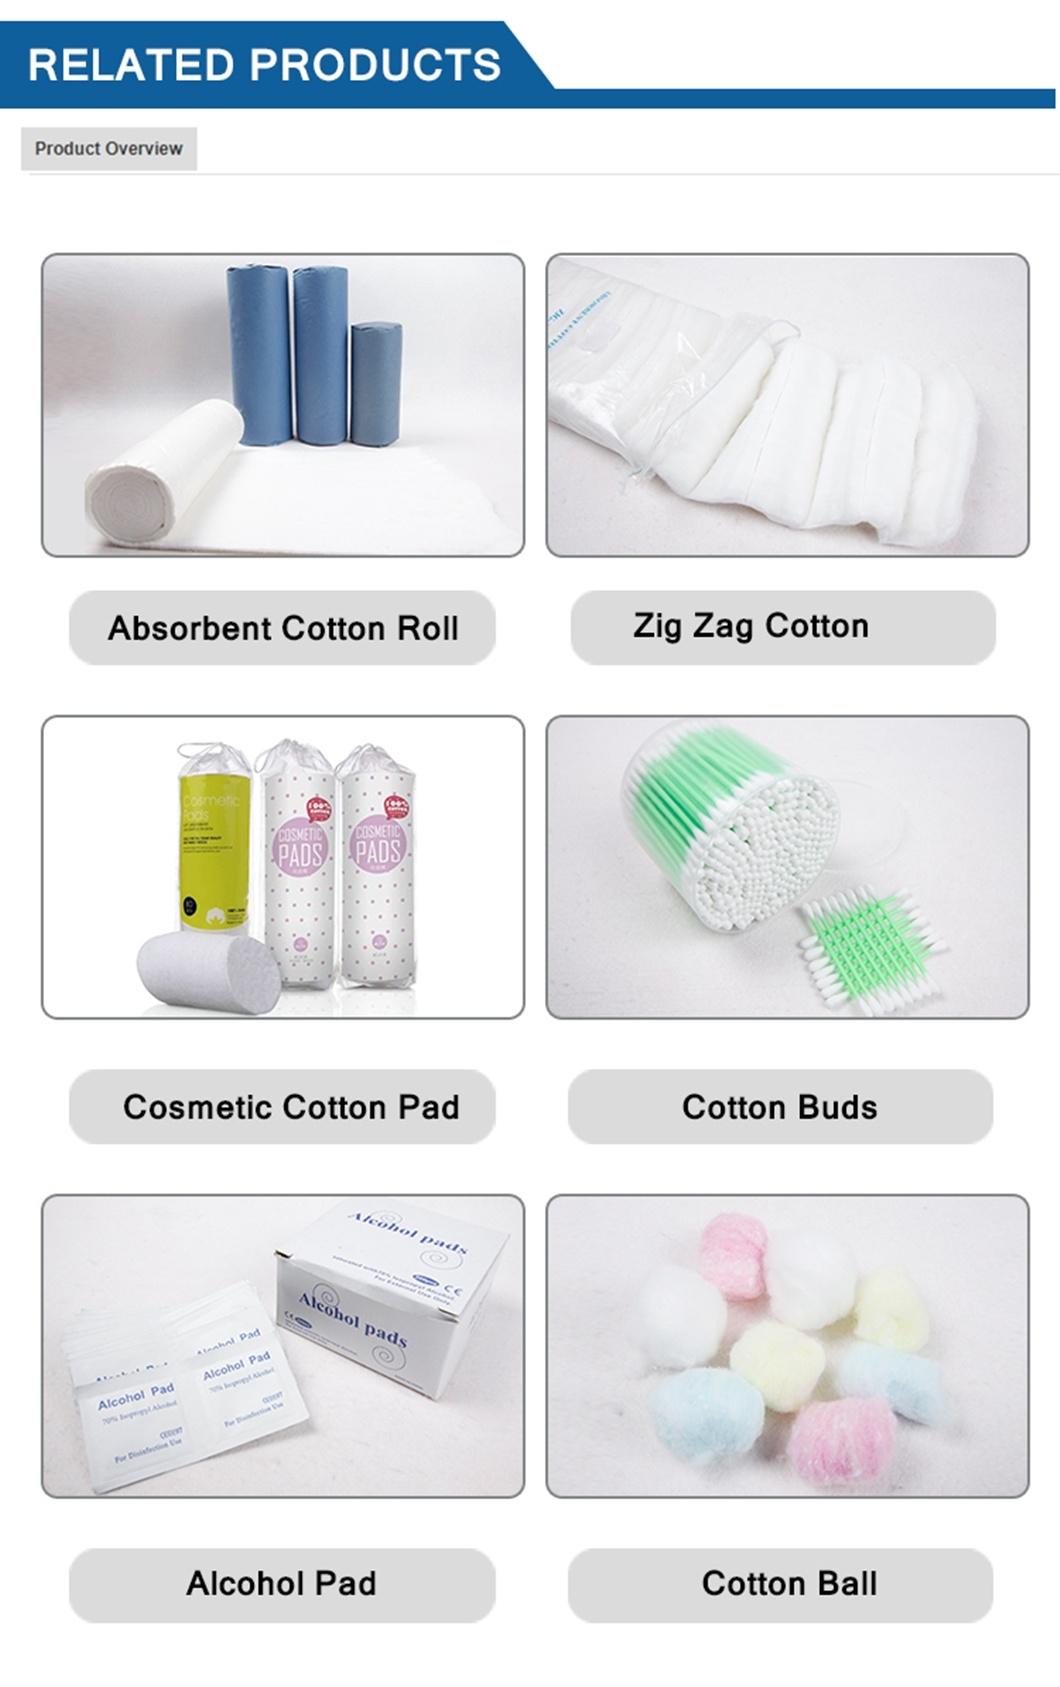 Disposable Plastic Stick Ear Cleaning Cotton Buds